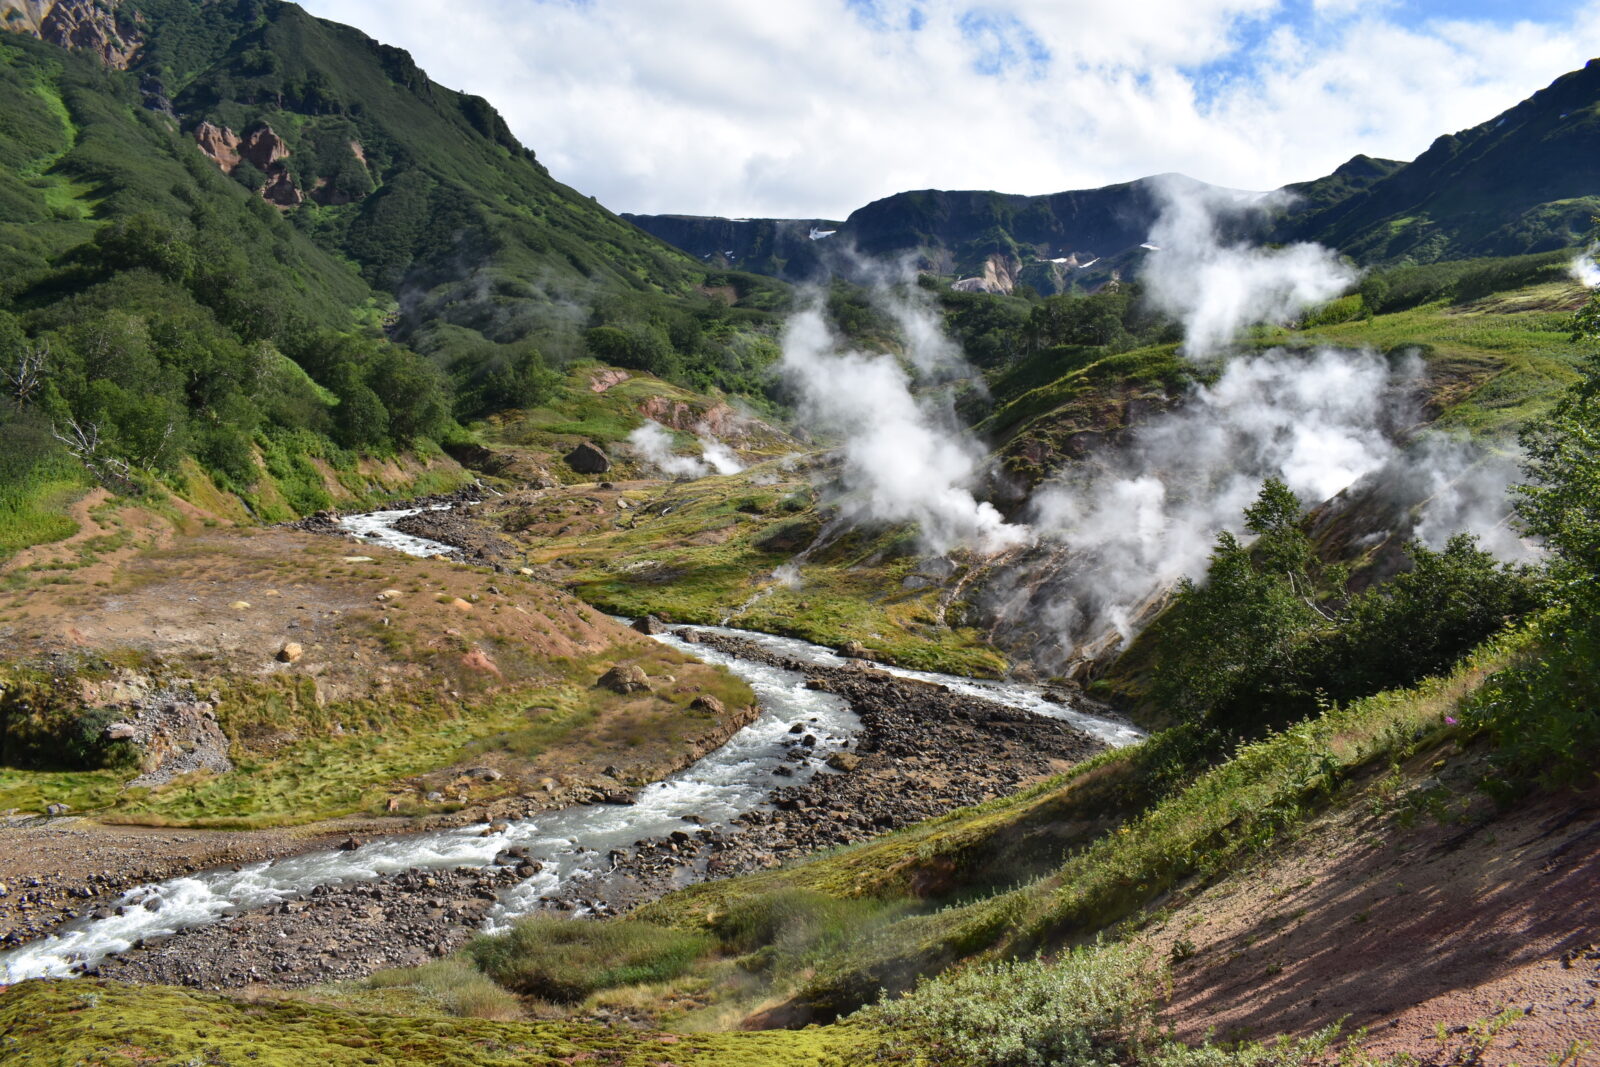 Here Are 24 Glorious Natural Attractions – Can You Match Them to Their Country? Valley of Geysers, Kamchatka, Russia